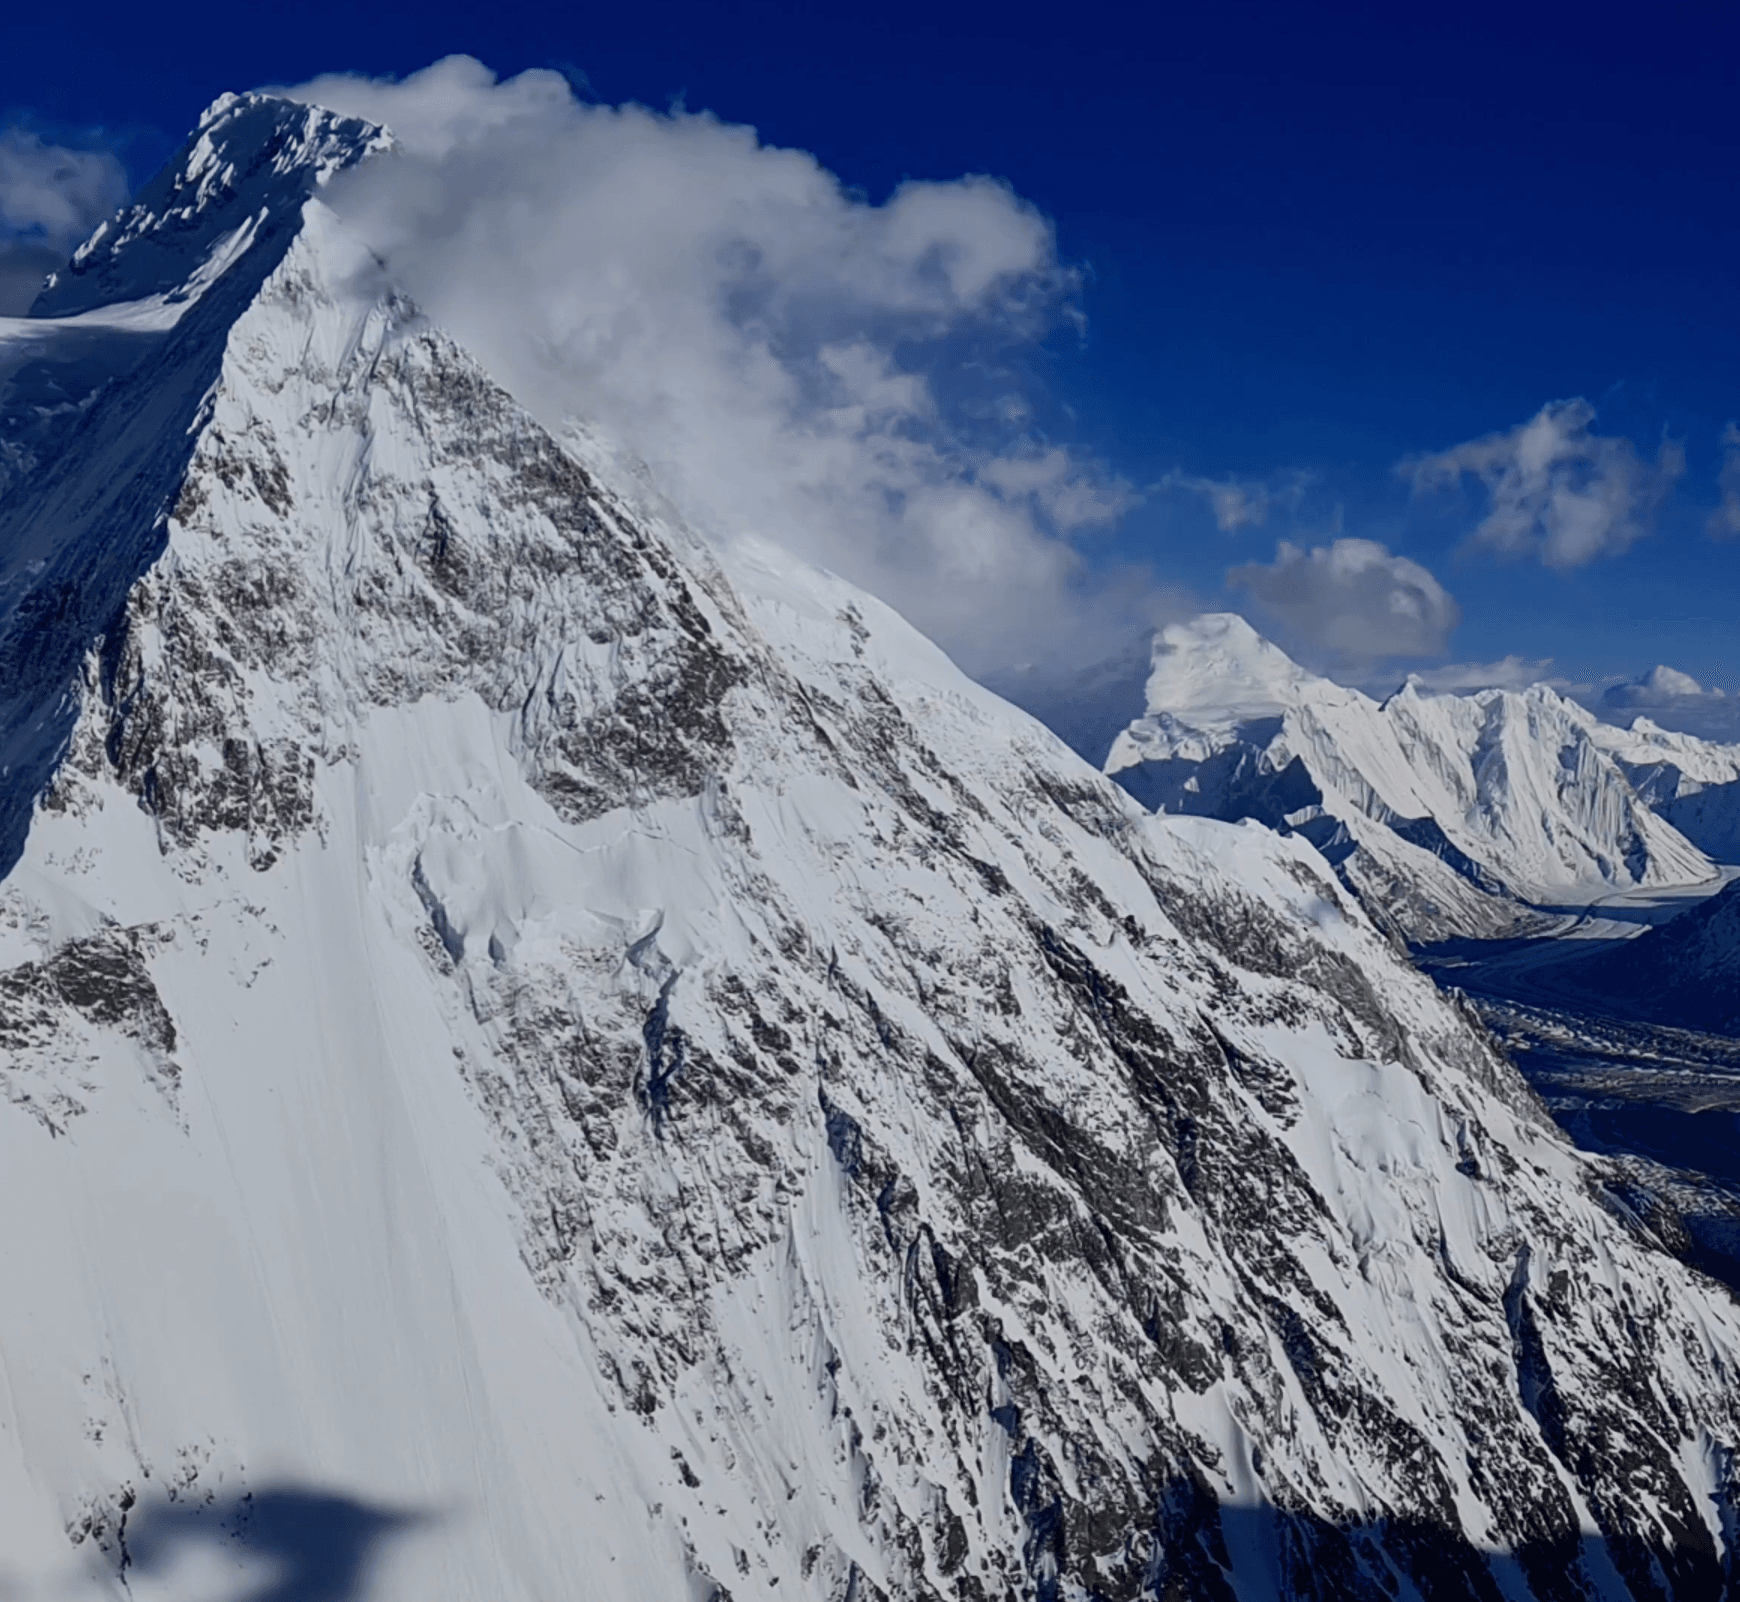 K2 Collection 1/1: Camp 2. 6,700 m/22,200 ft